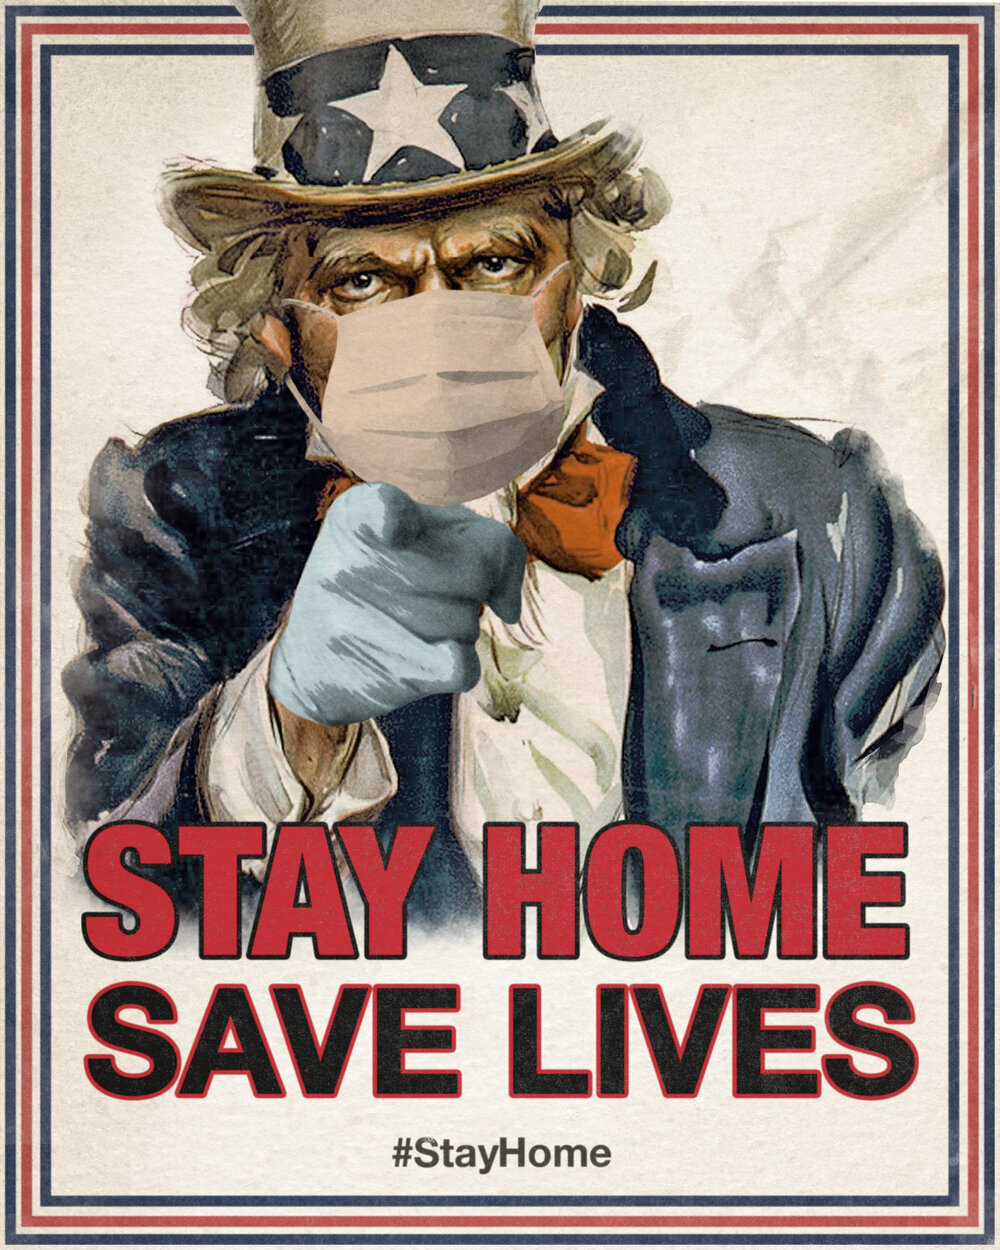 Cw-COVID-19-Uncle-Sam-StayHome-VERT_2-STAY-HOME-SAVE-LIVES-Final.jpg